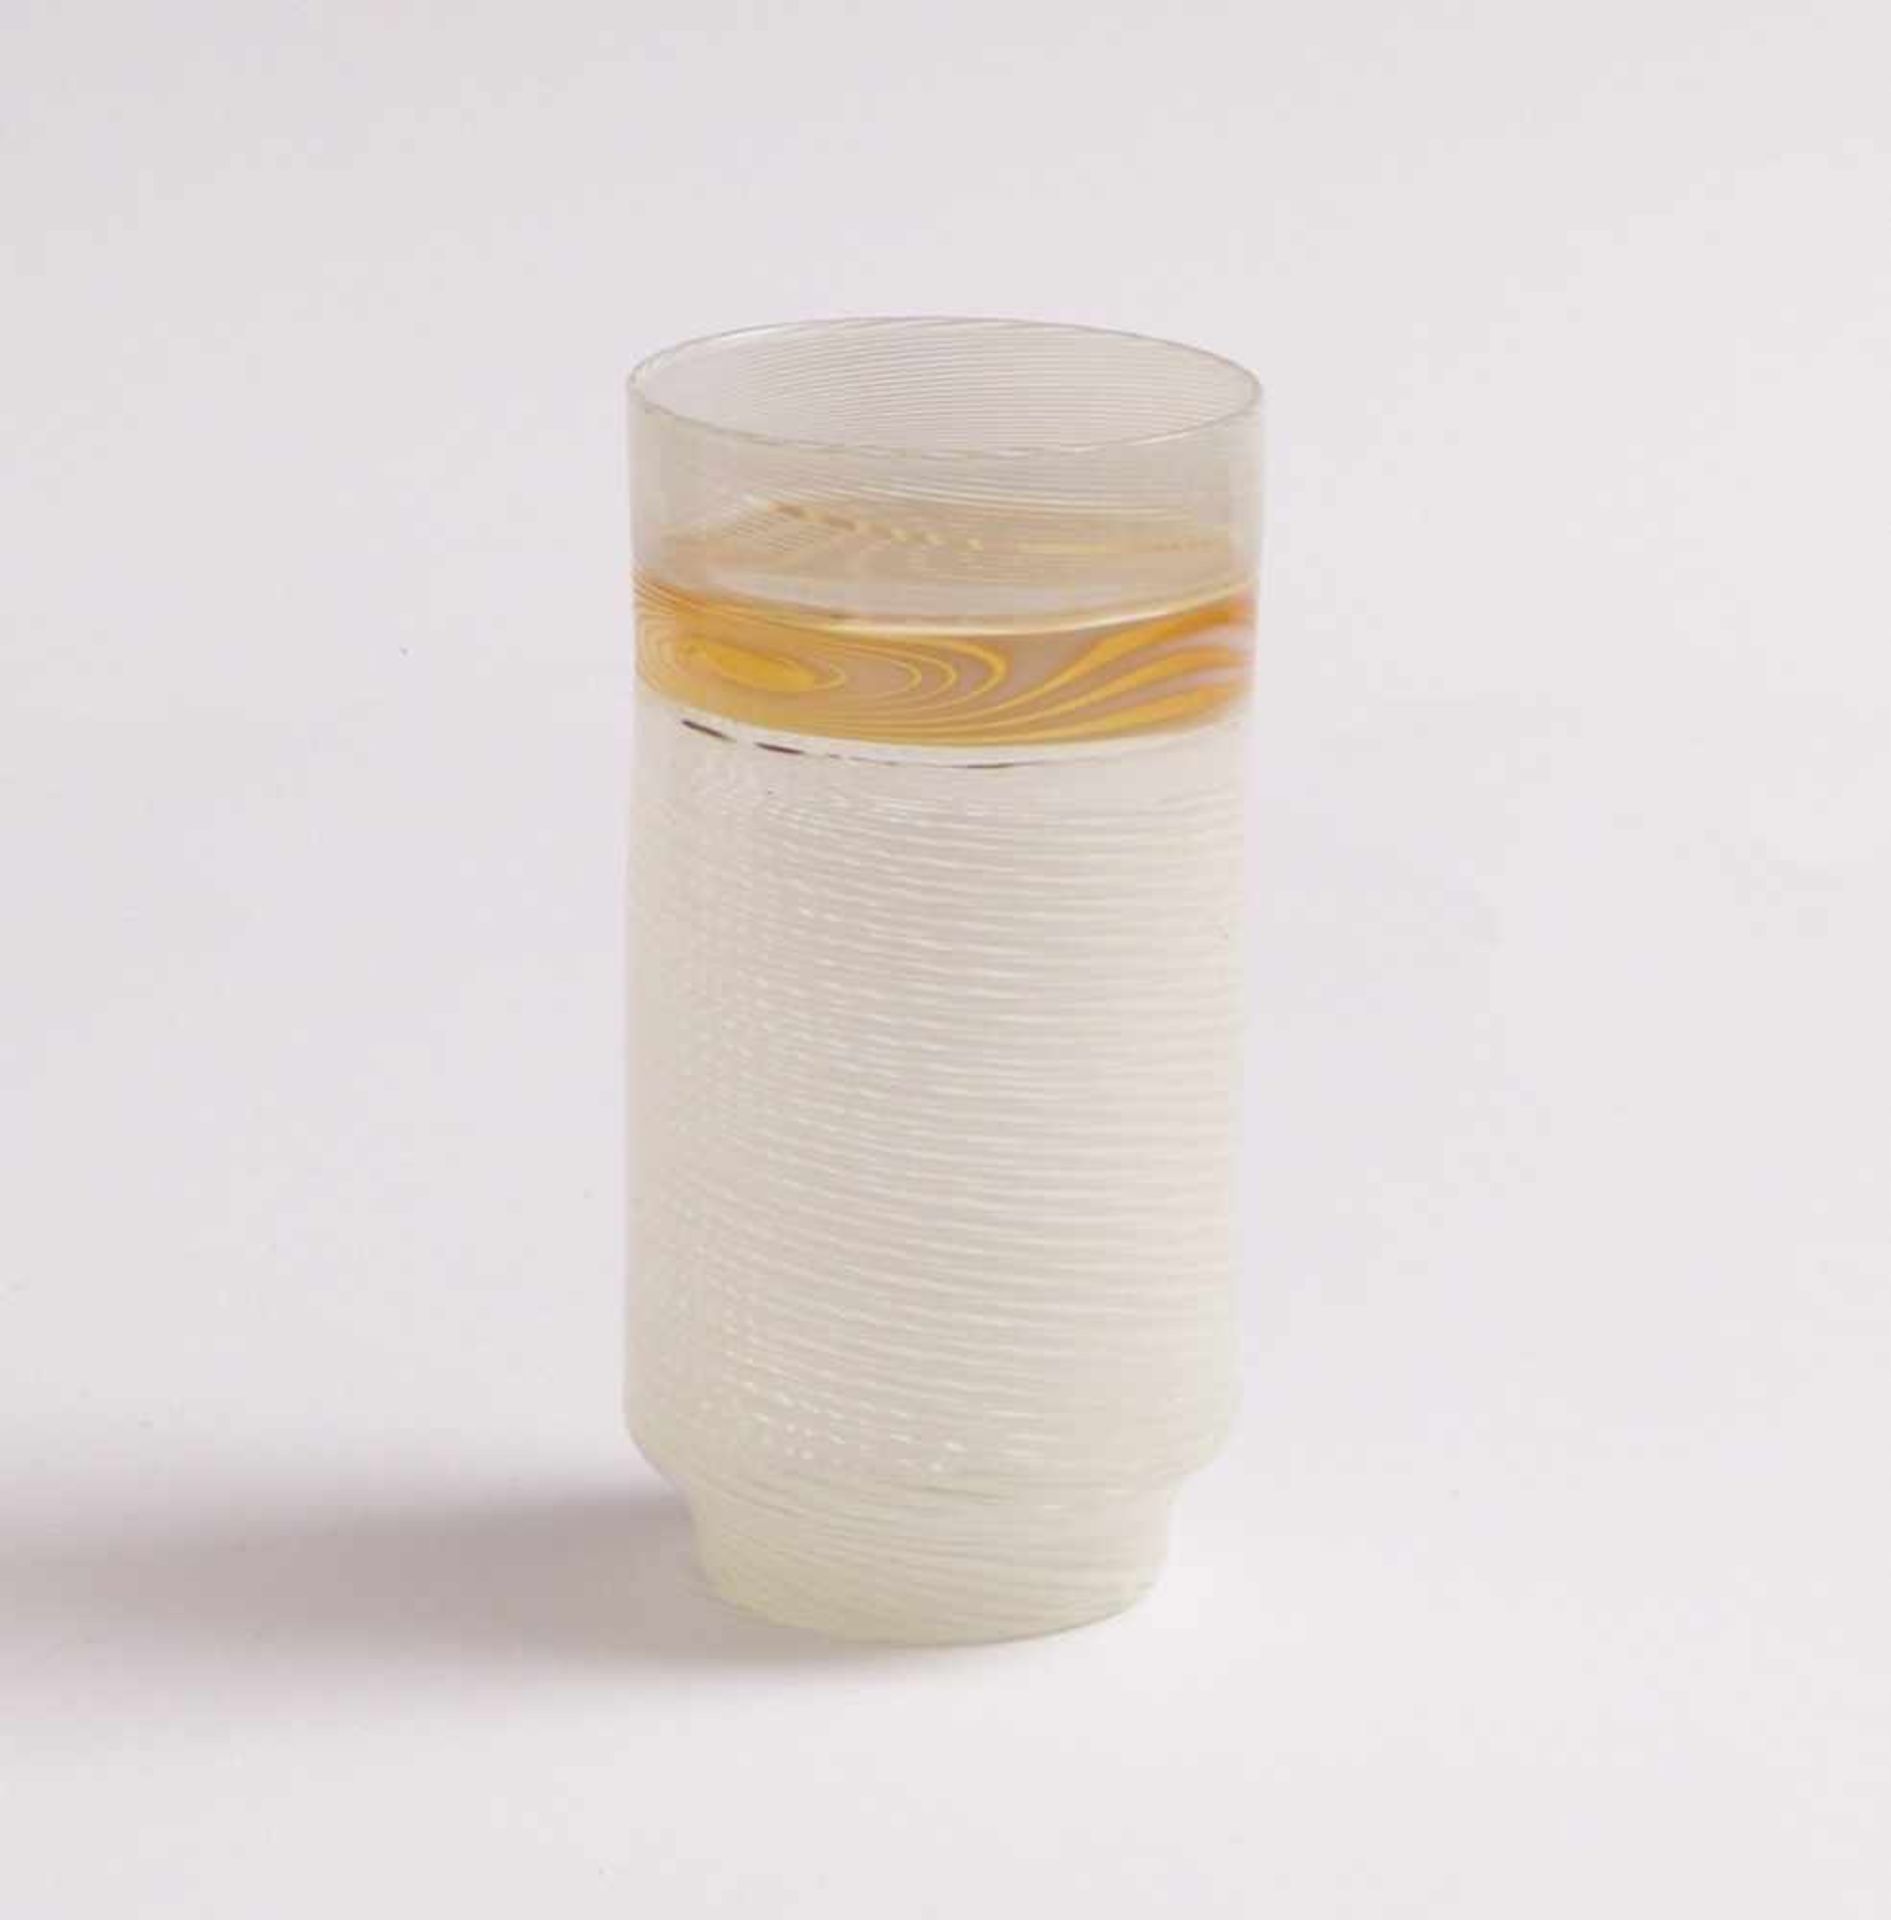 Schindhelm, OttoSmall vase(Lauscha 1920 born) Colorless glass with white and yellow threads. - Bild 2 aus 2